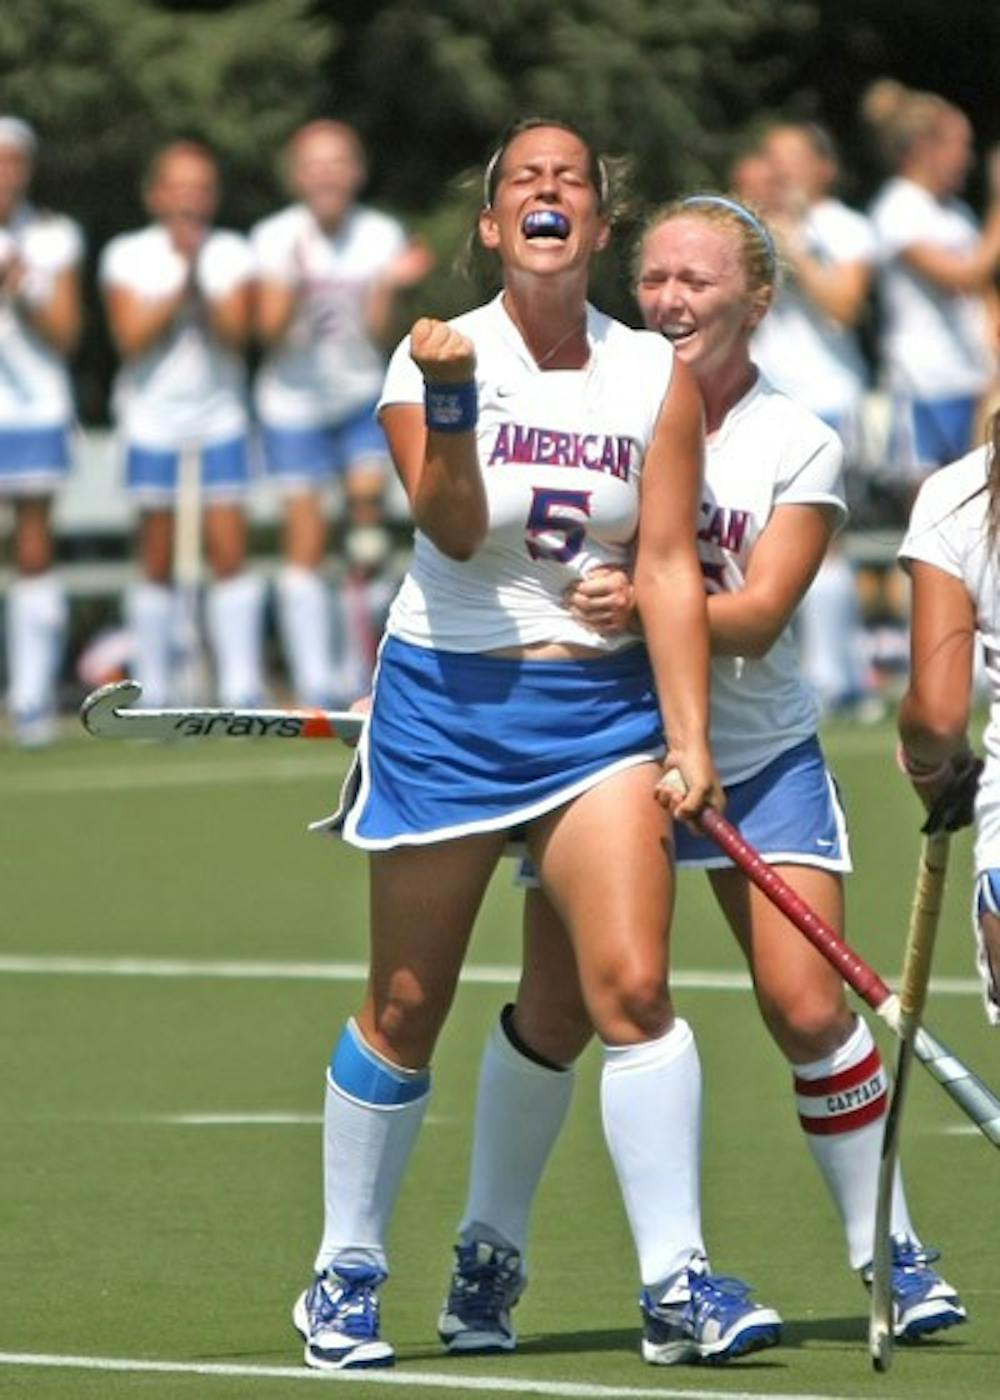 Sophomore defender Gina Hofmann celebrates a goal in their Aug. 27 win against University of Richmond. The Eagles won that game 5-1. On Sunday, the Eagles dropped their first game of the season to Old Dominion University with a 2-1 loss.